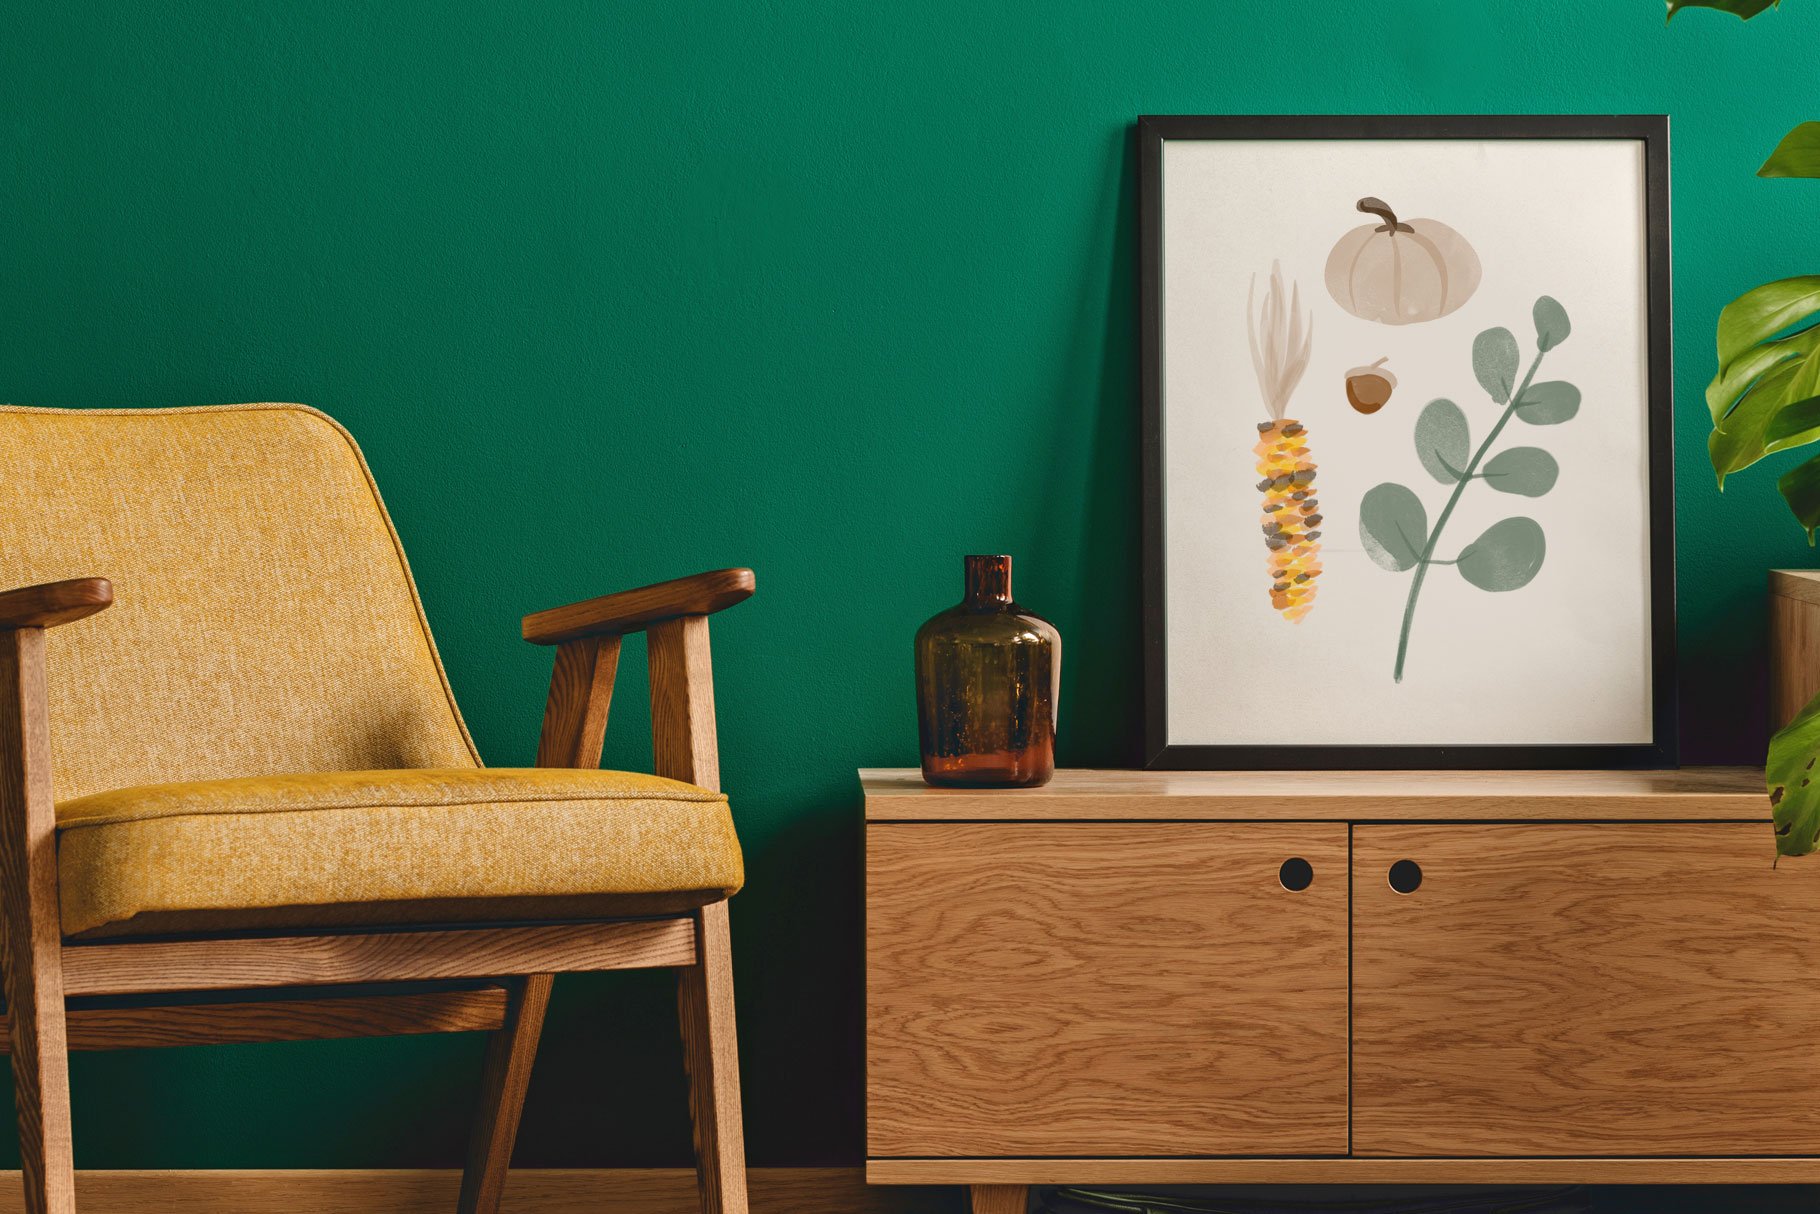 Example of using these autumn illustration in an interior.